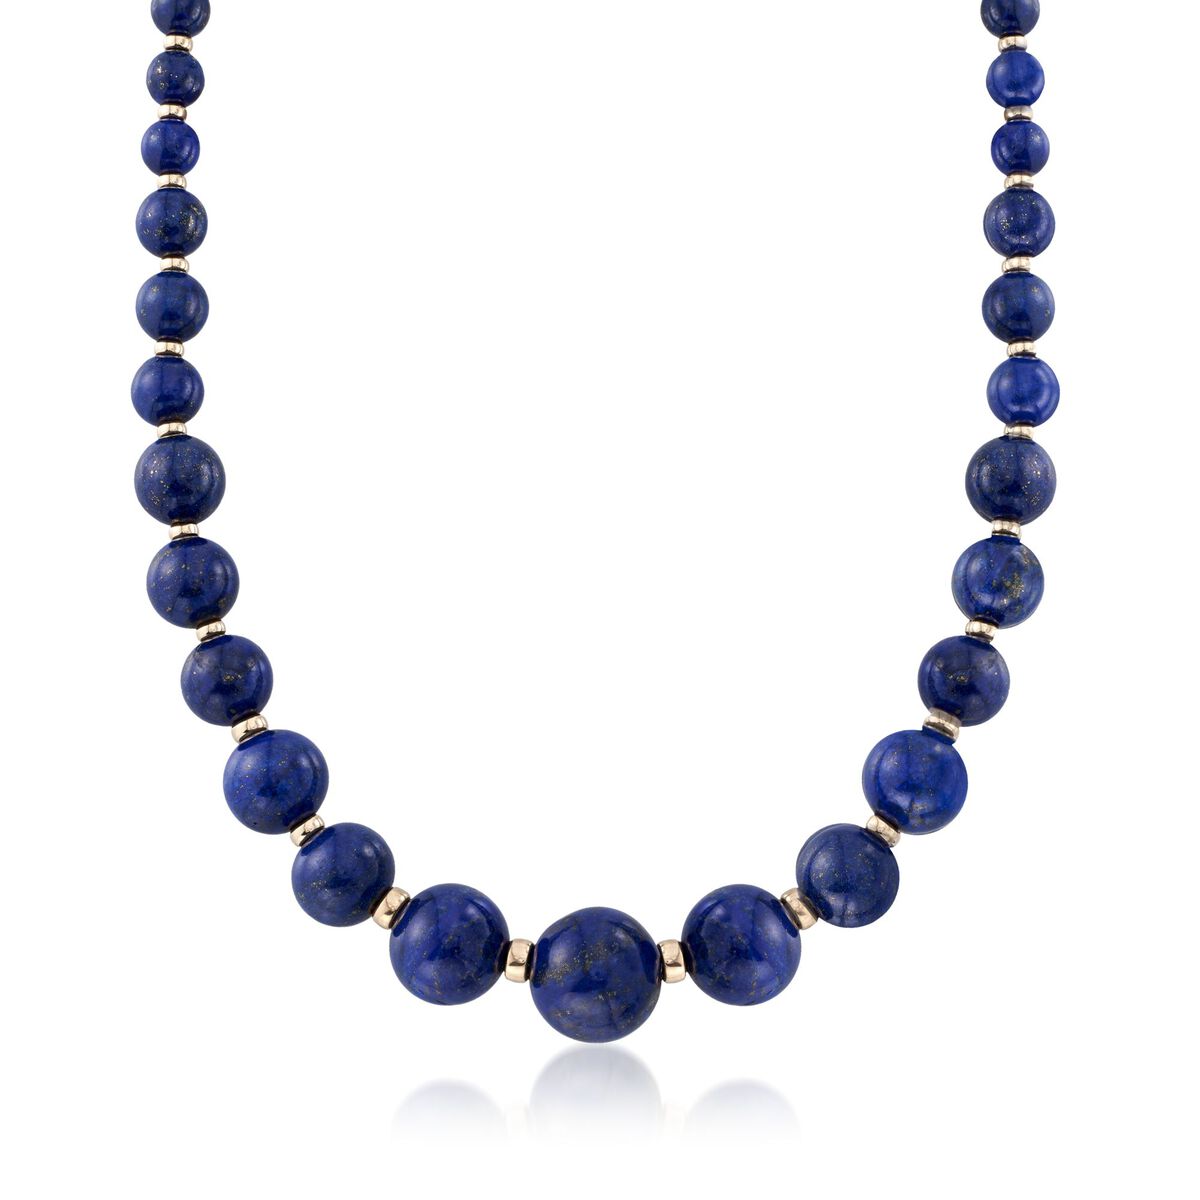 6-18mm Graduated Blue Lapis Bead Necklace with 14kt Yellow Gold | Ross ...